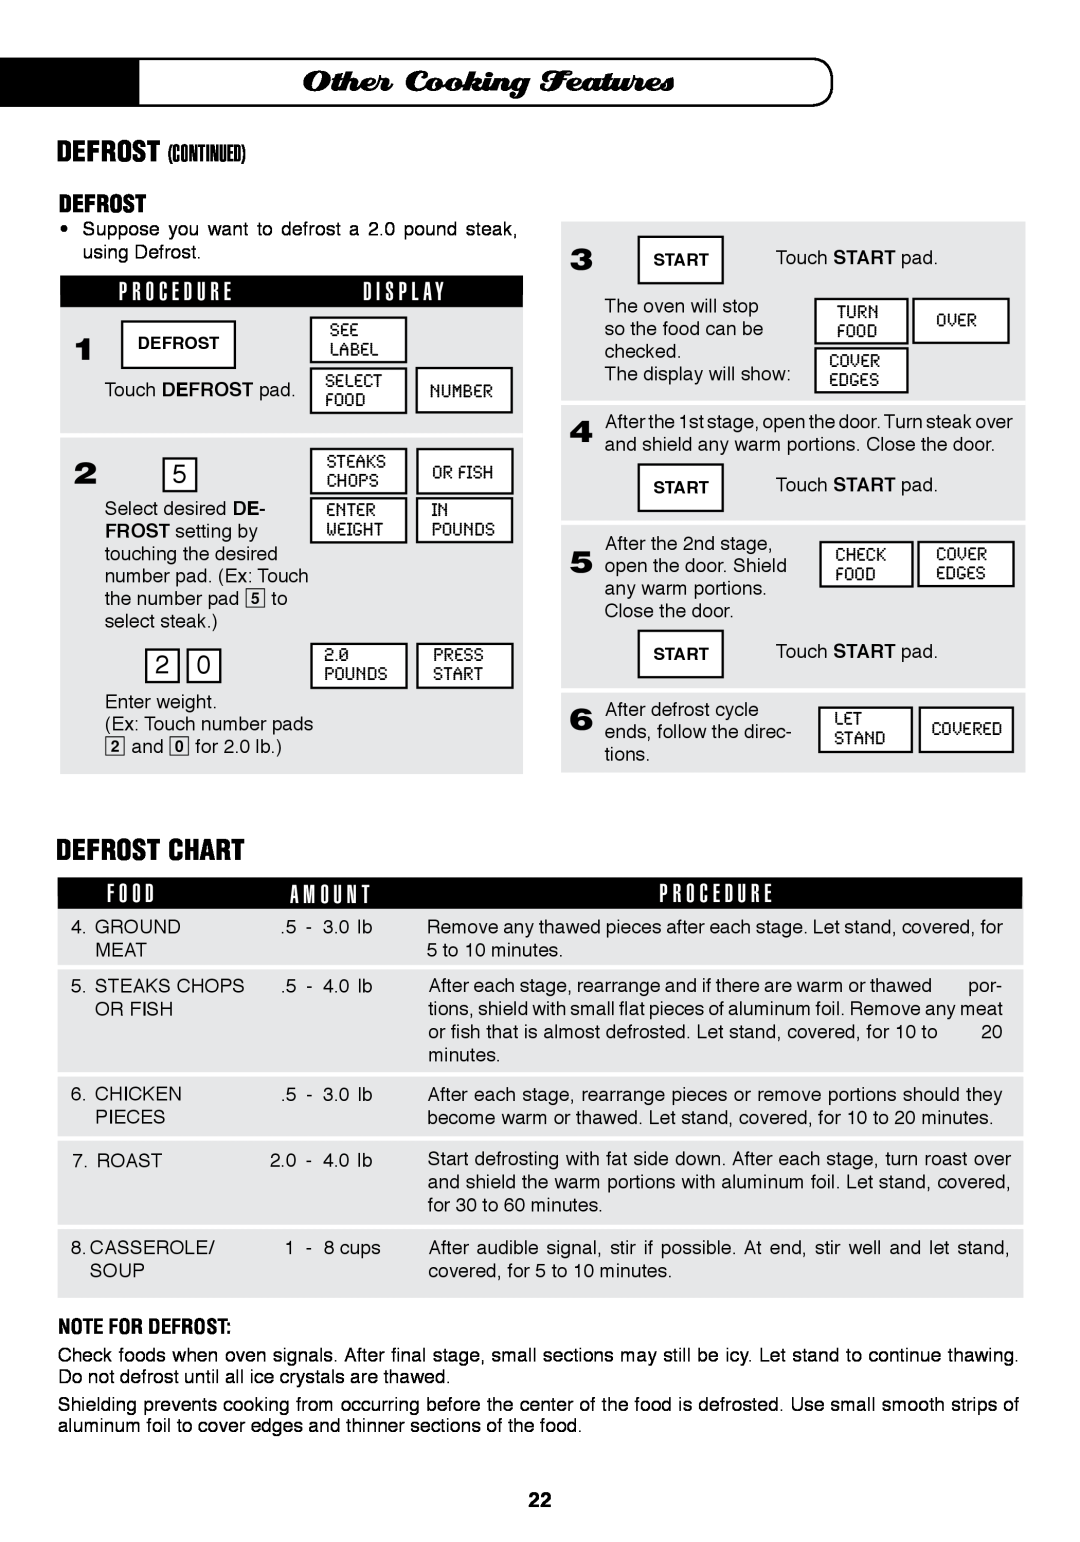 Fisher & Paykel MO-24SS Defrost Chart, Note For Defrost, Other Cooking Features, D I S P L A Y, F O O D, P R O C E D U R E 